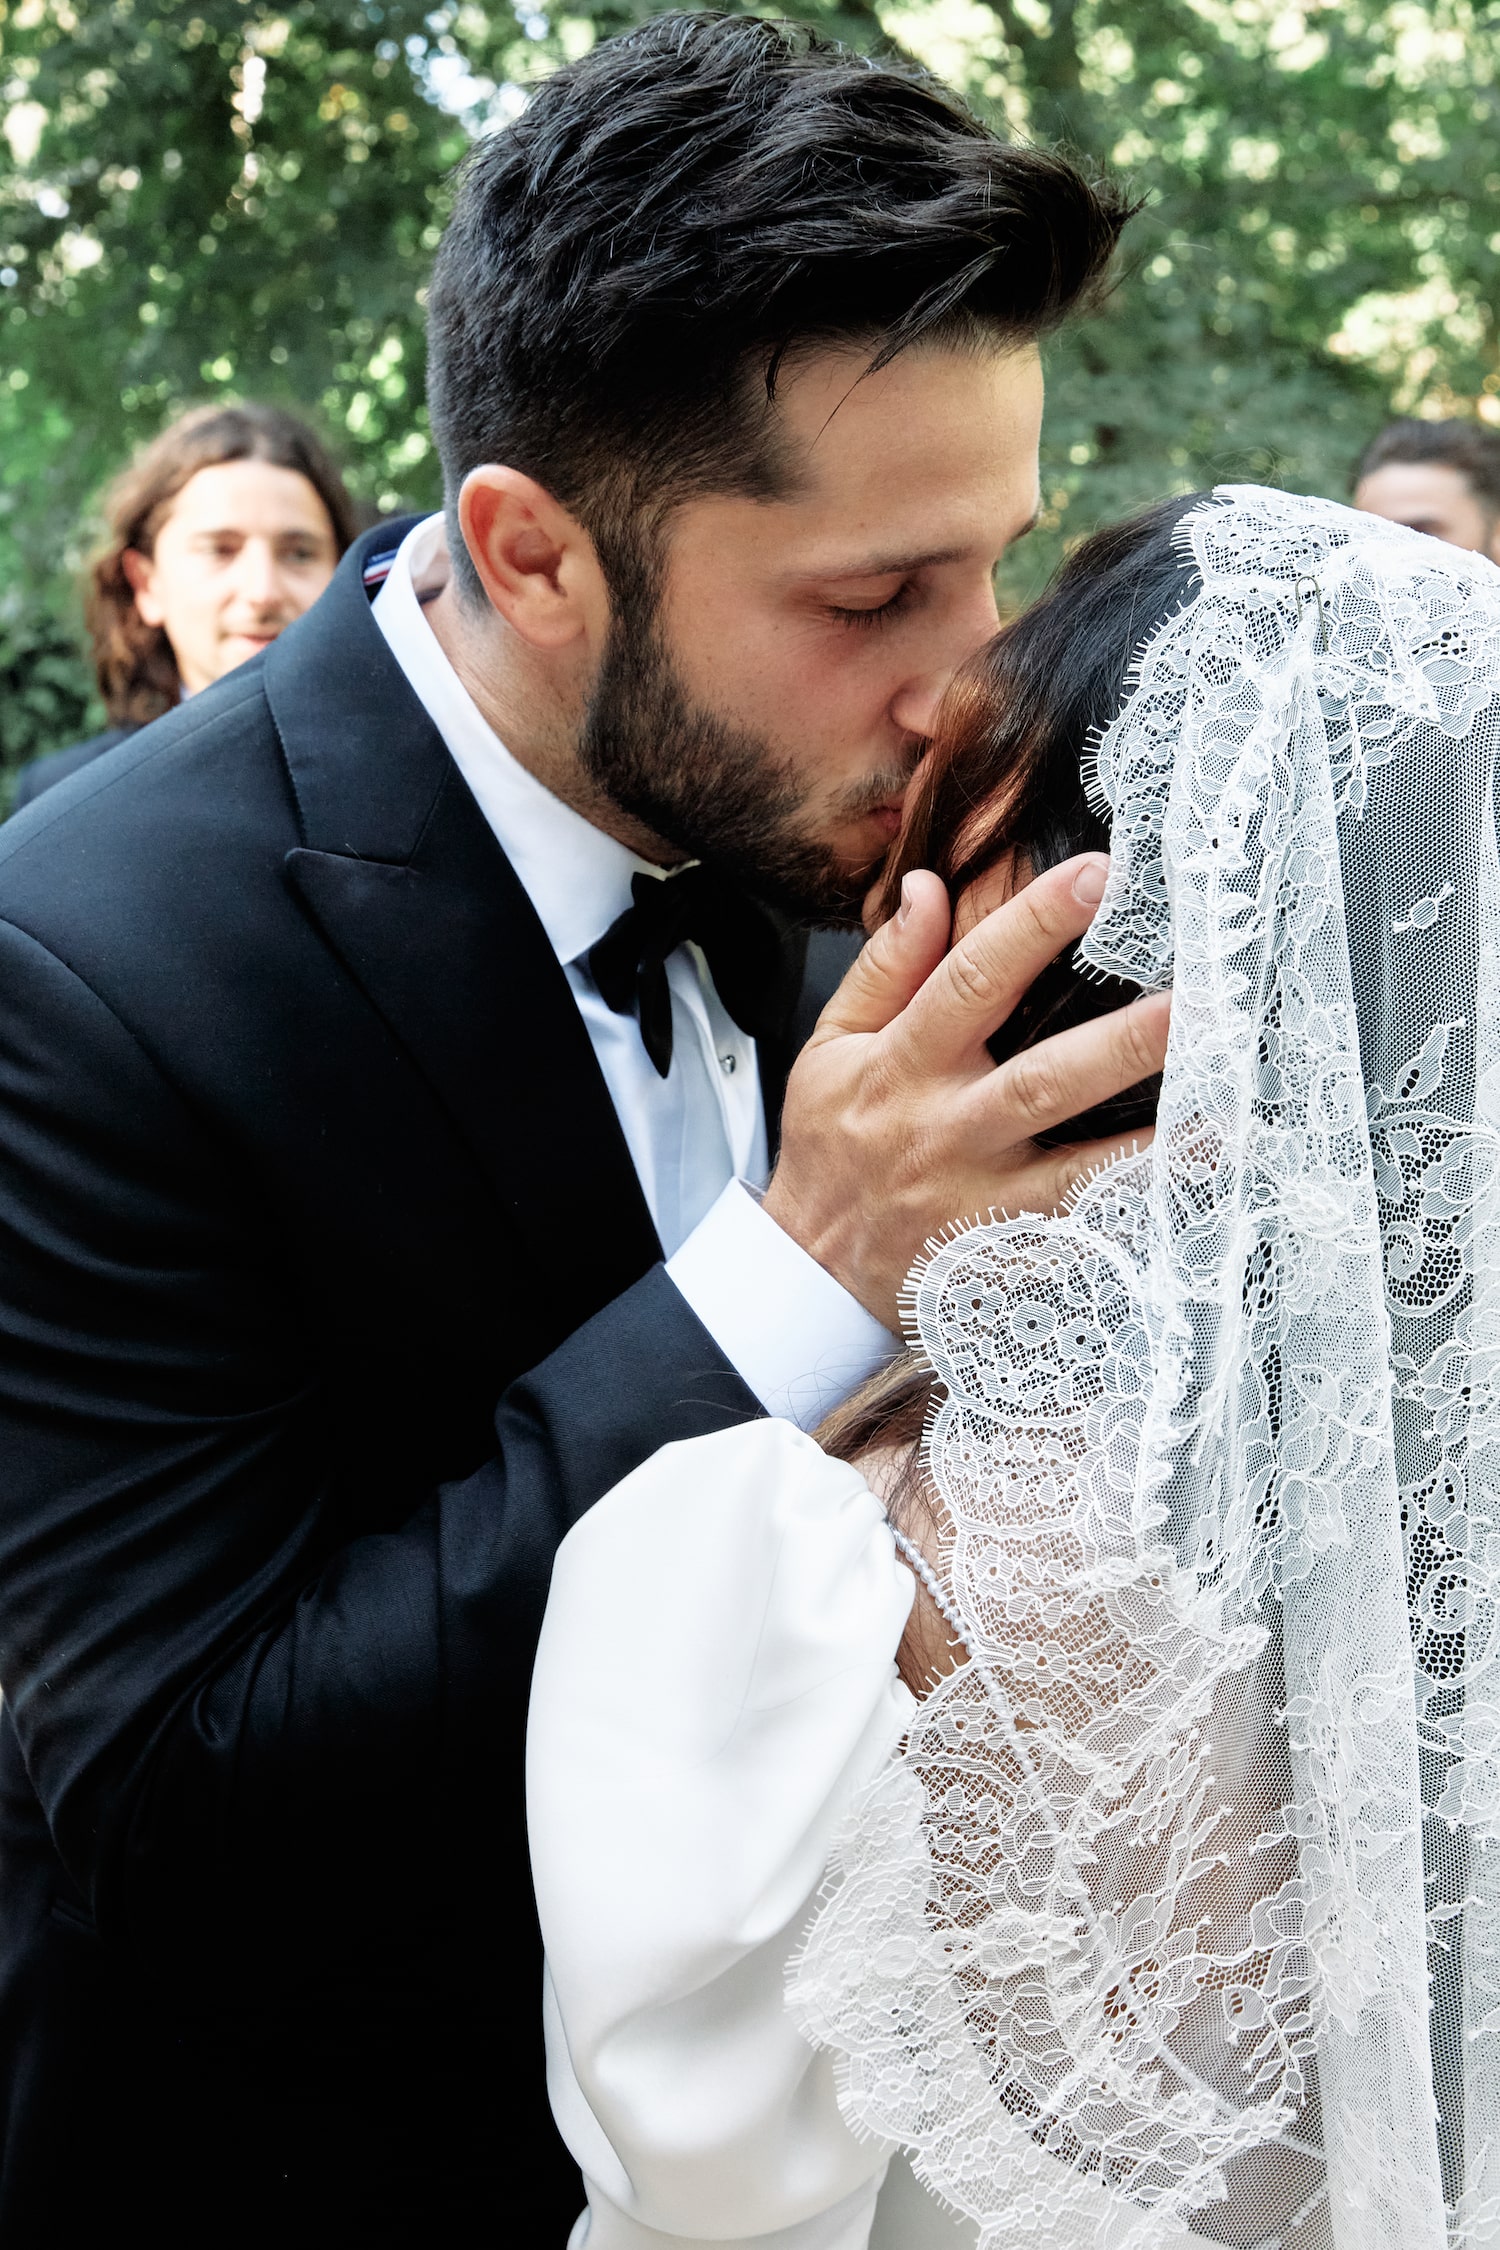 Groom holding brides face as they share a kiss